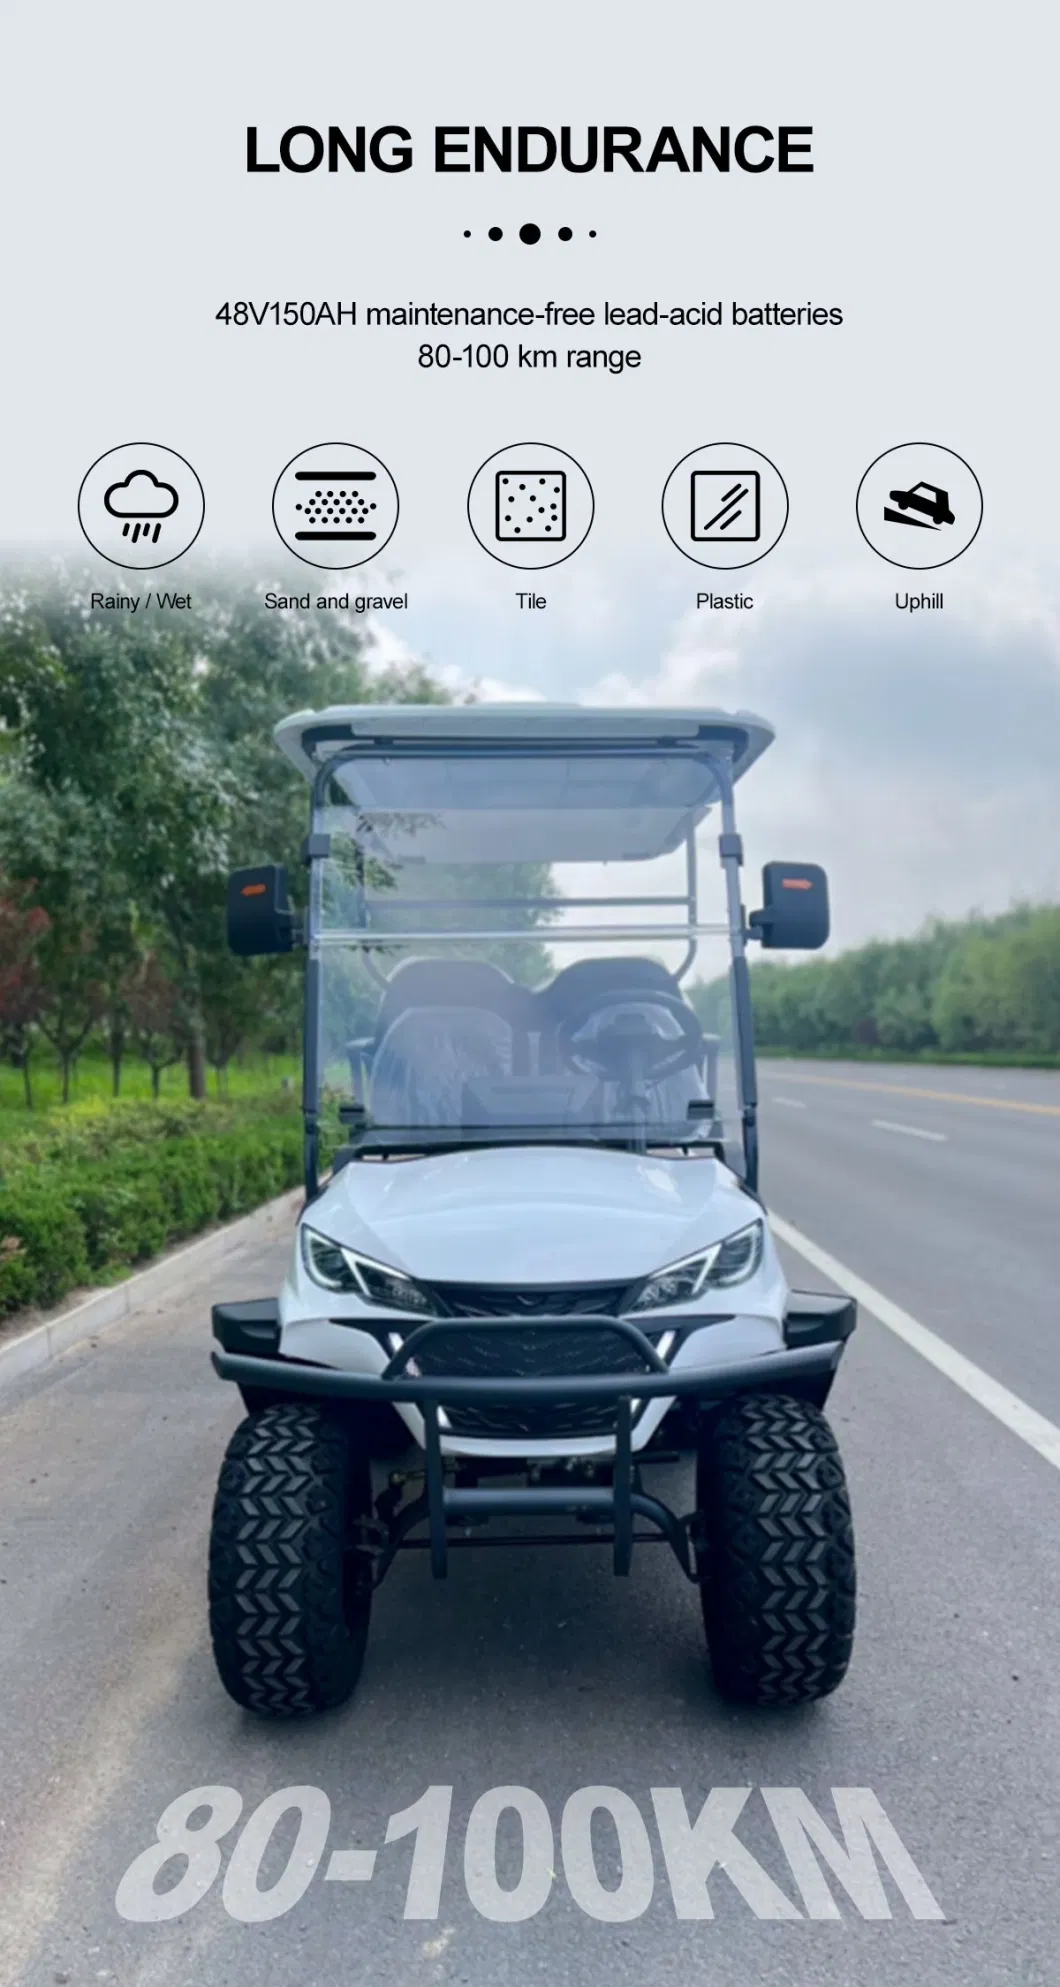 4 Seats Buggies Unlimited Advanced EV Golf Carts off Road White Classic Electric Golf Cart Price